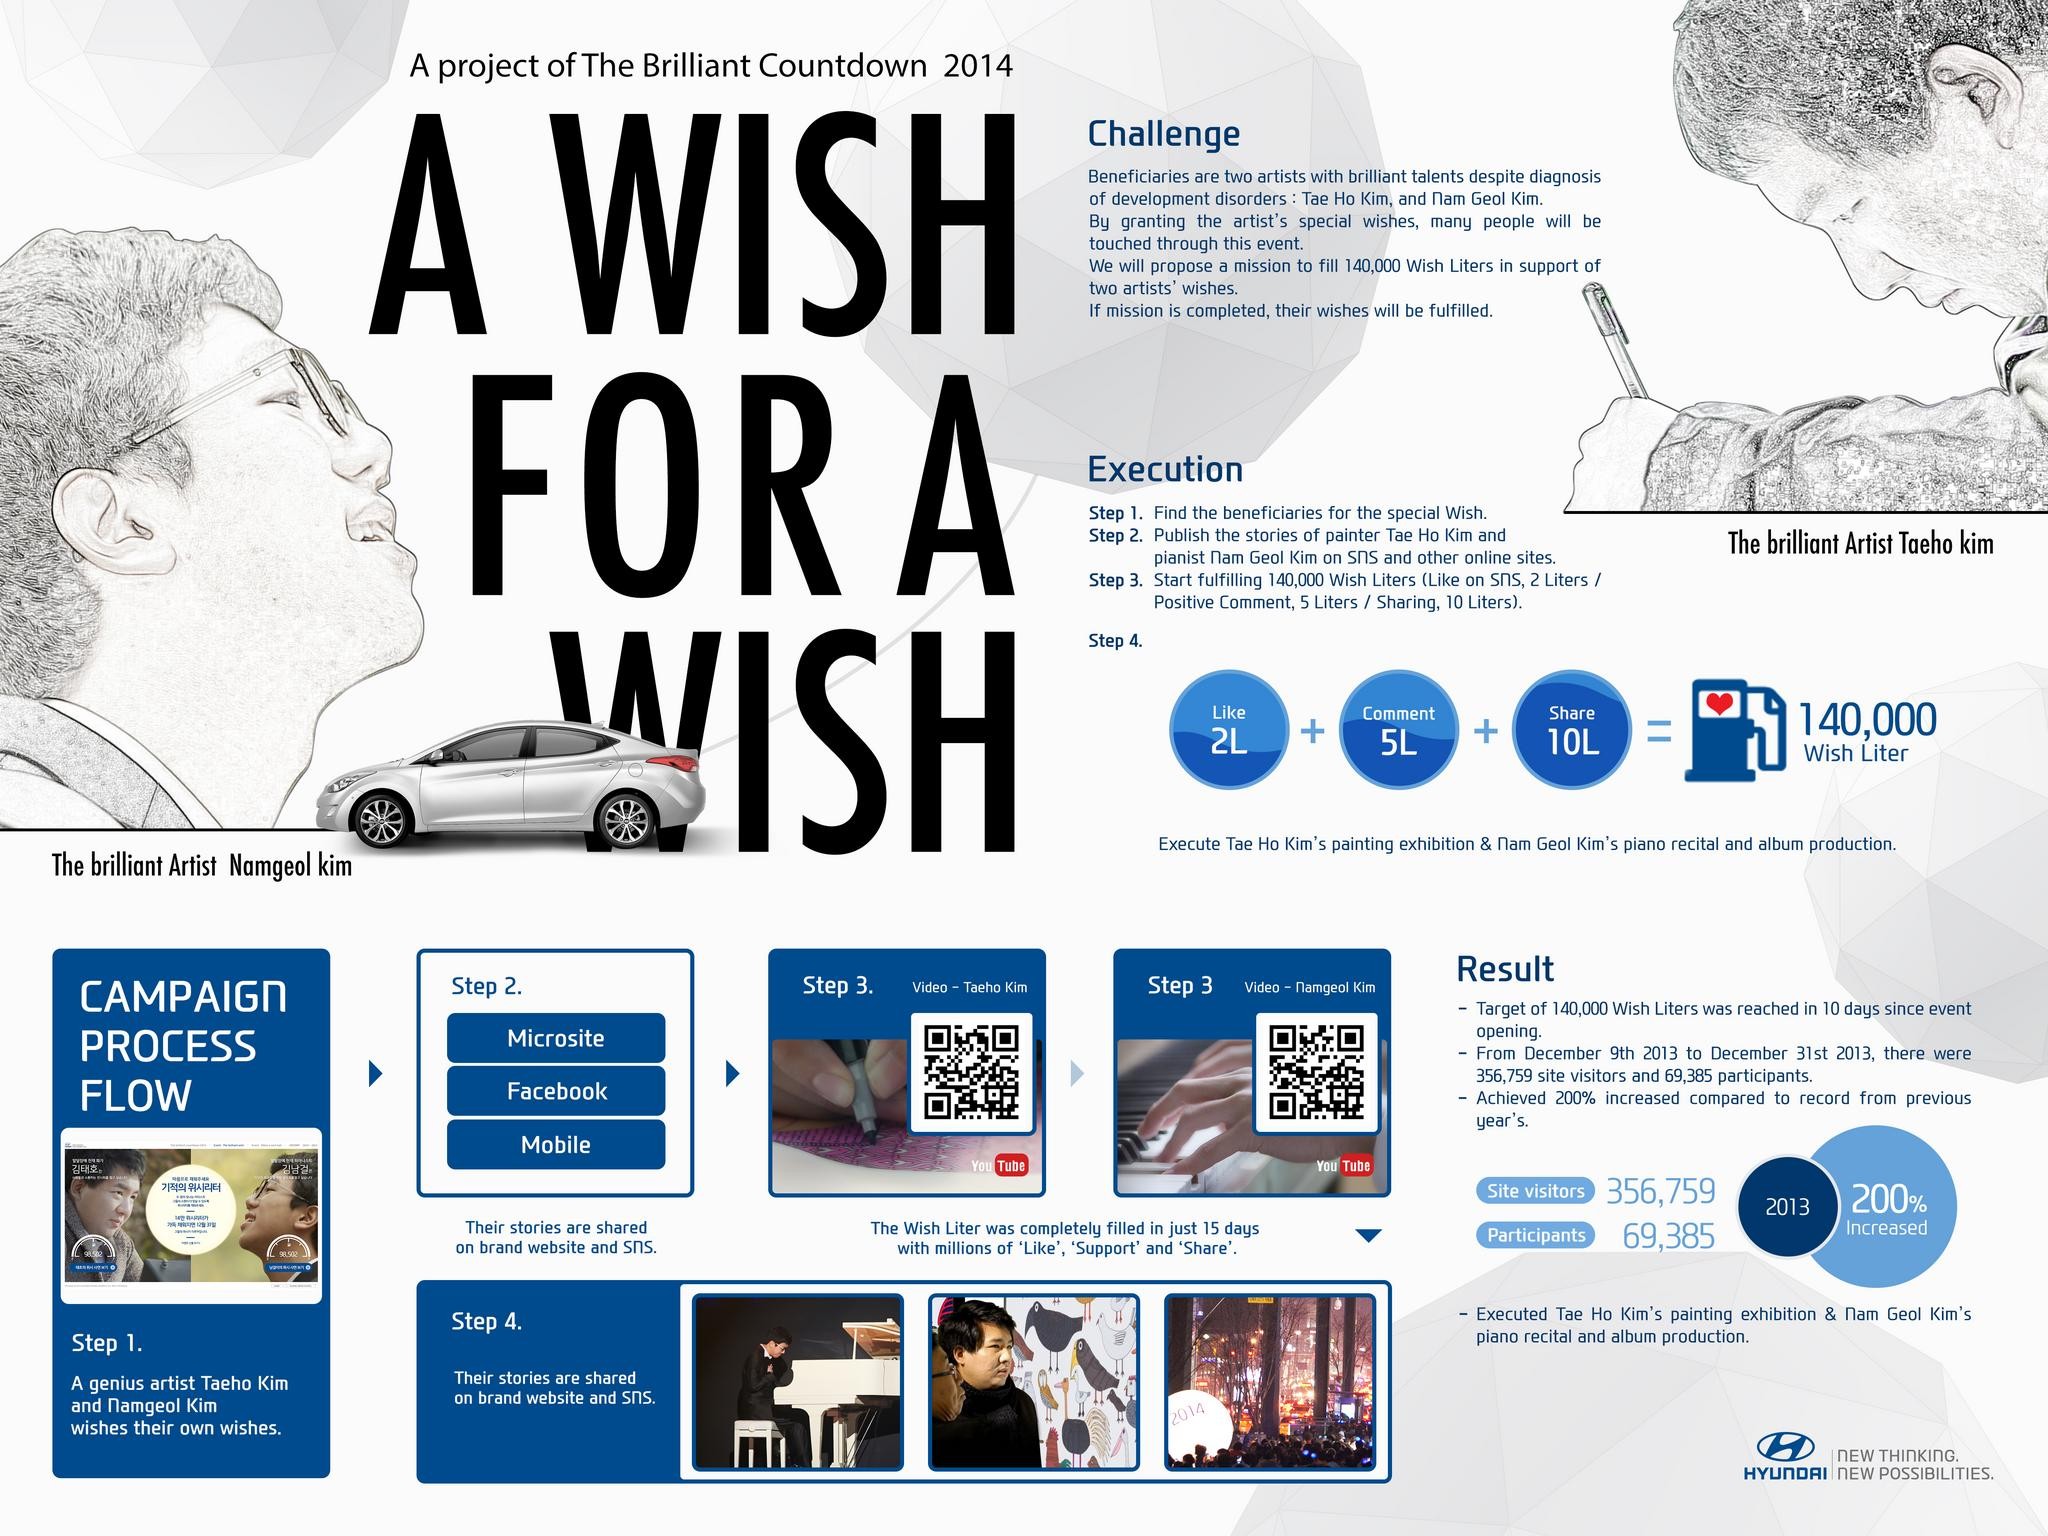 THE BRILLIANT COUNTDOWN 2014 'A WISH FOR A WISH'